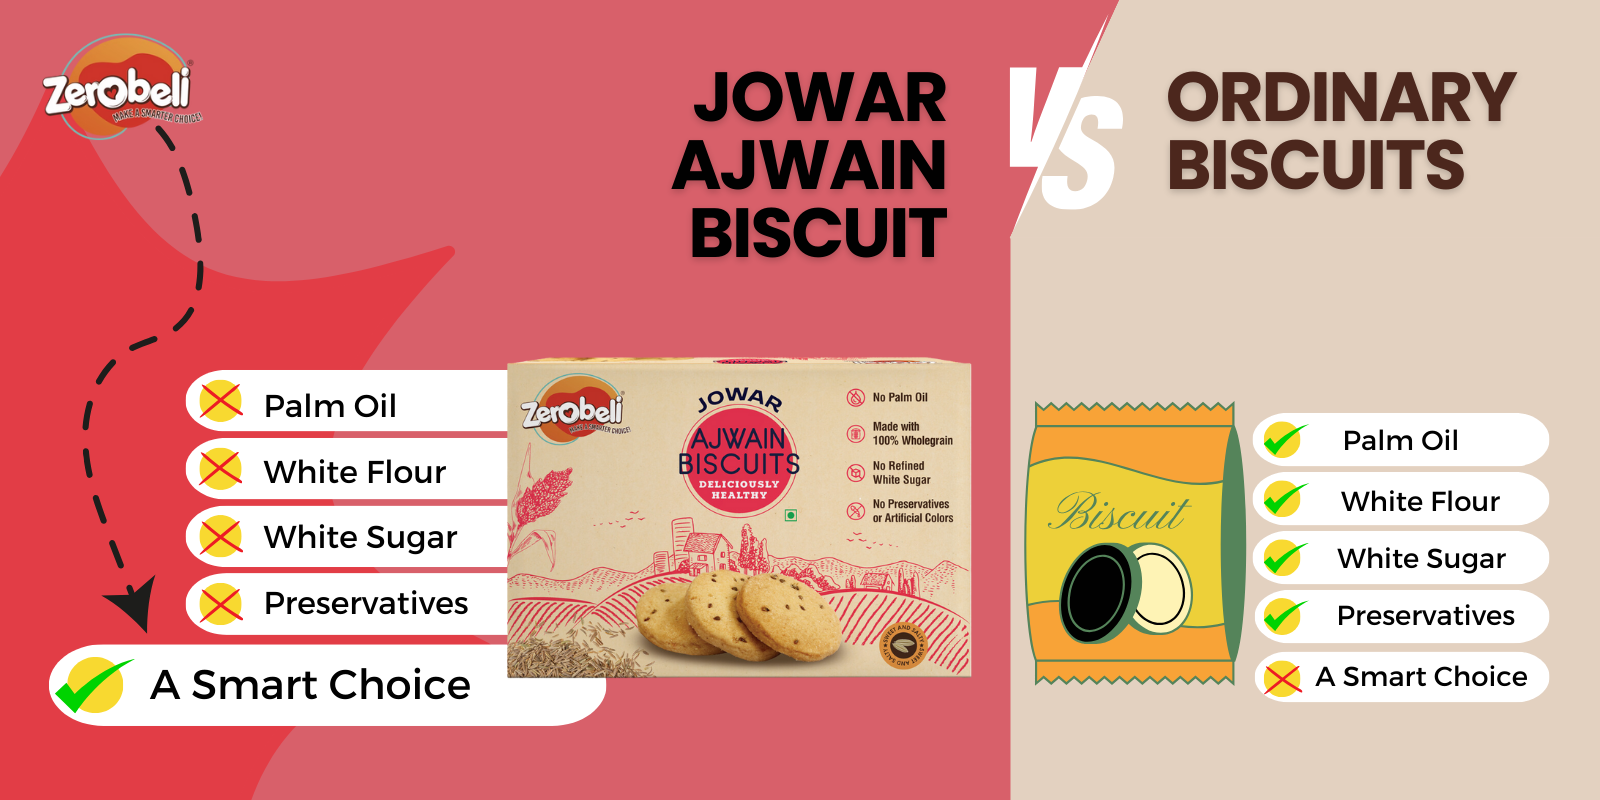 Jowar_ajwain_biscuit_Competition.png